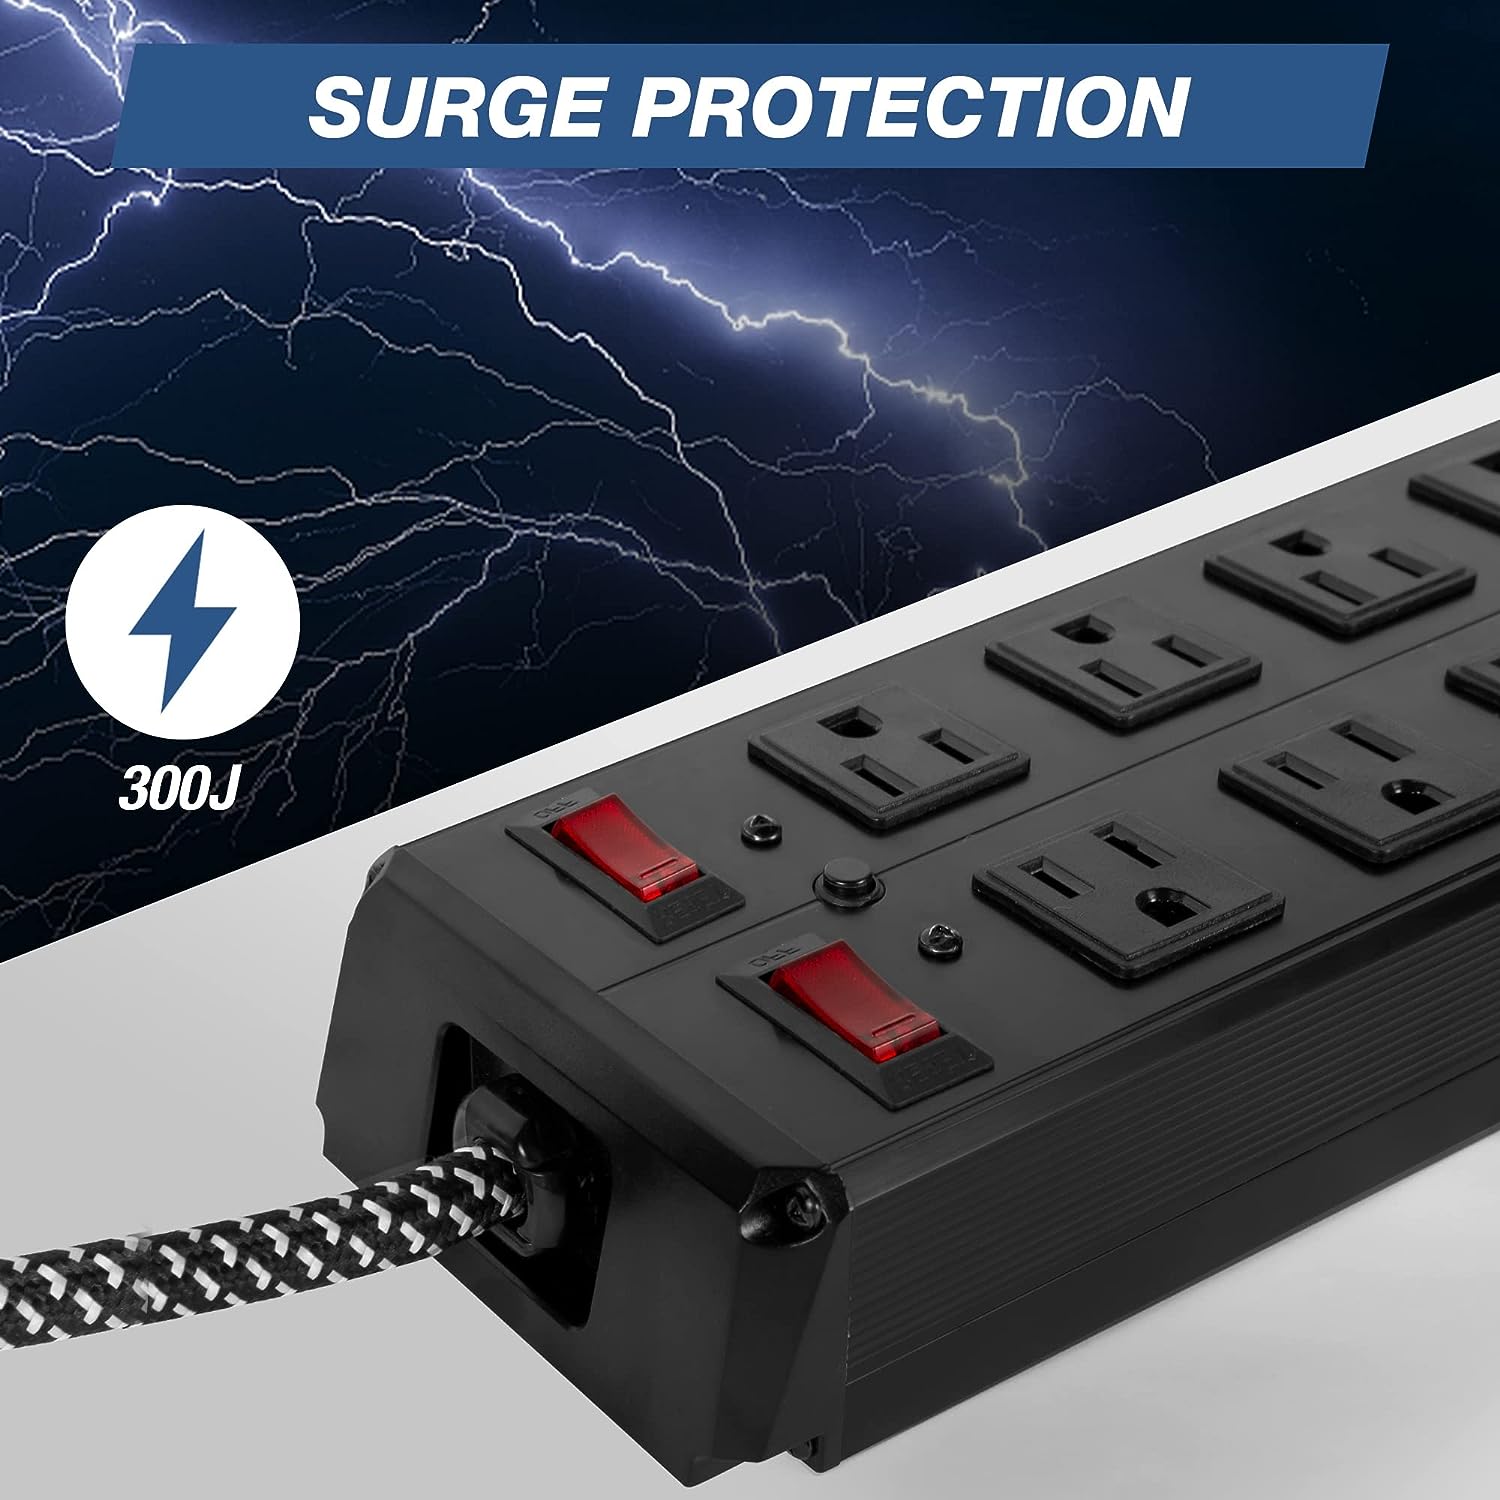 Power Strip 10 Outlets 2 Switches with Surge Protector 6-Foot Cord Wall Mount, Black